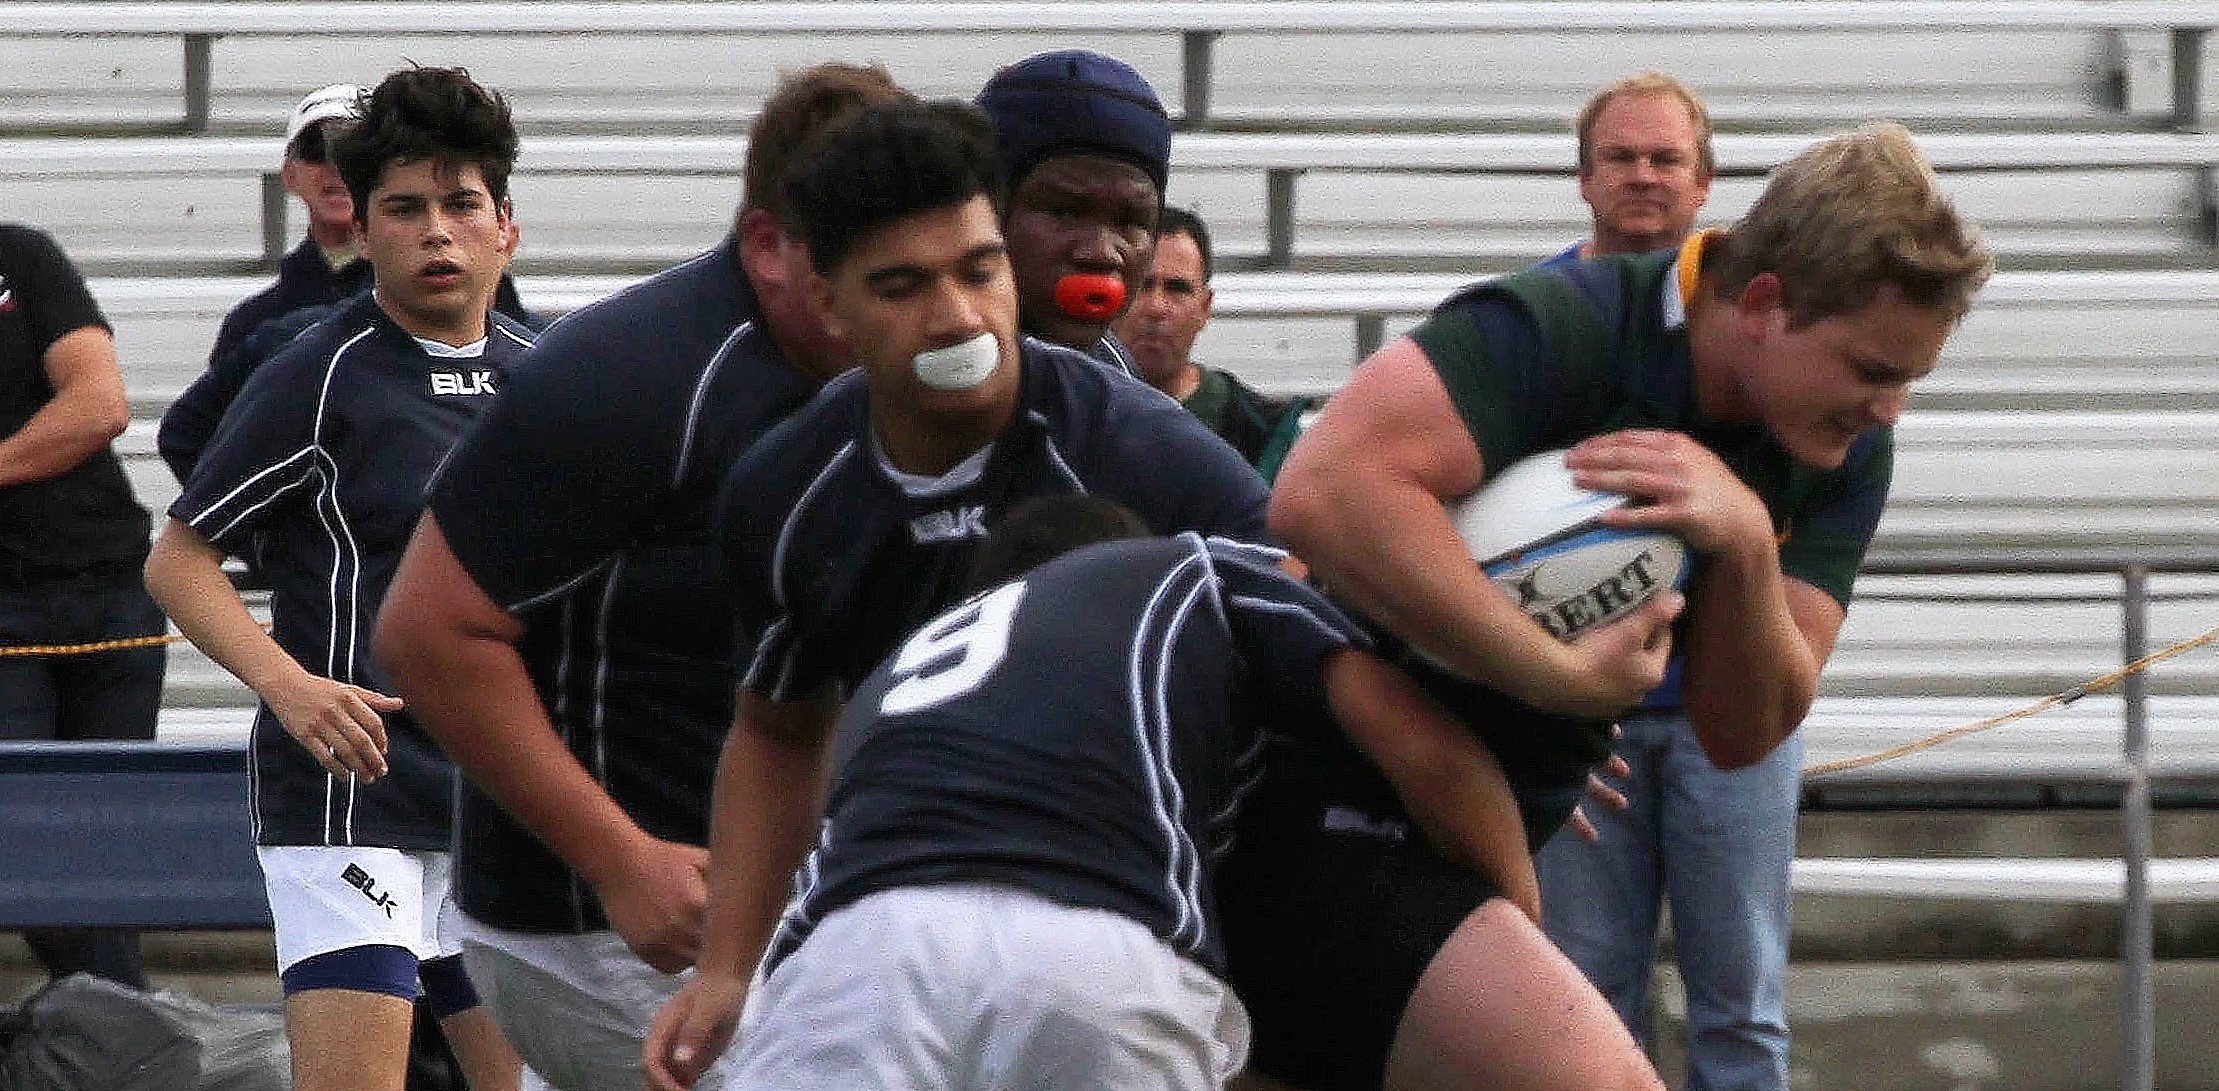 Ian Tarr for La Costa Canyon Rugby Feb 18 2017